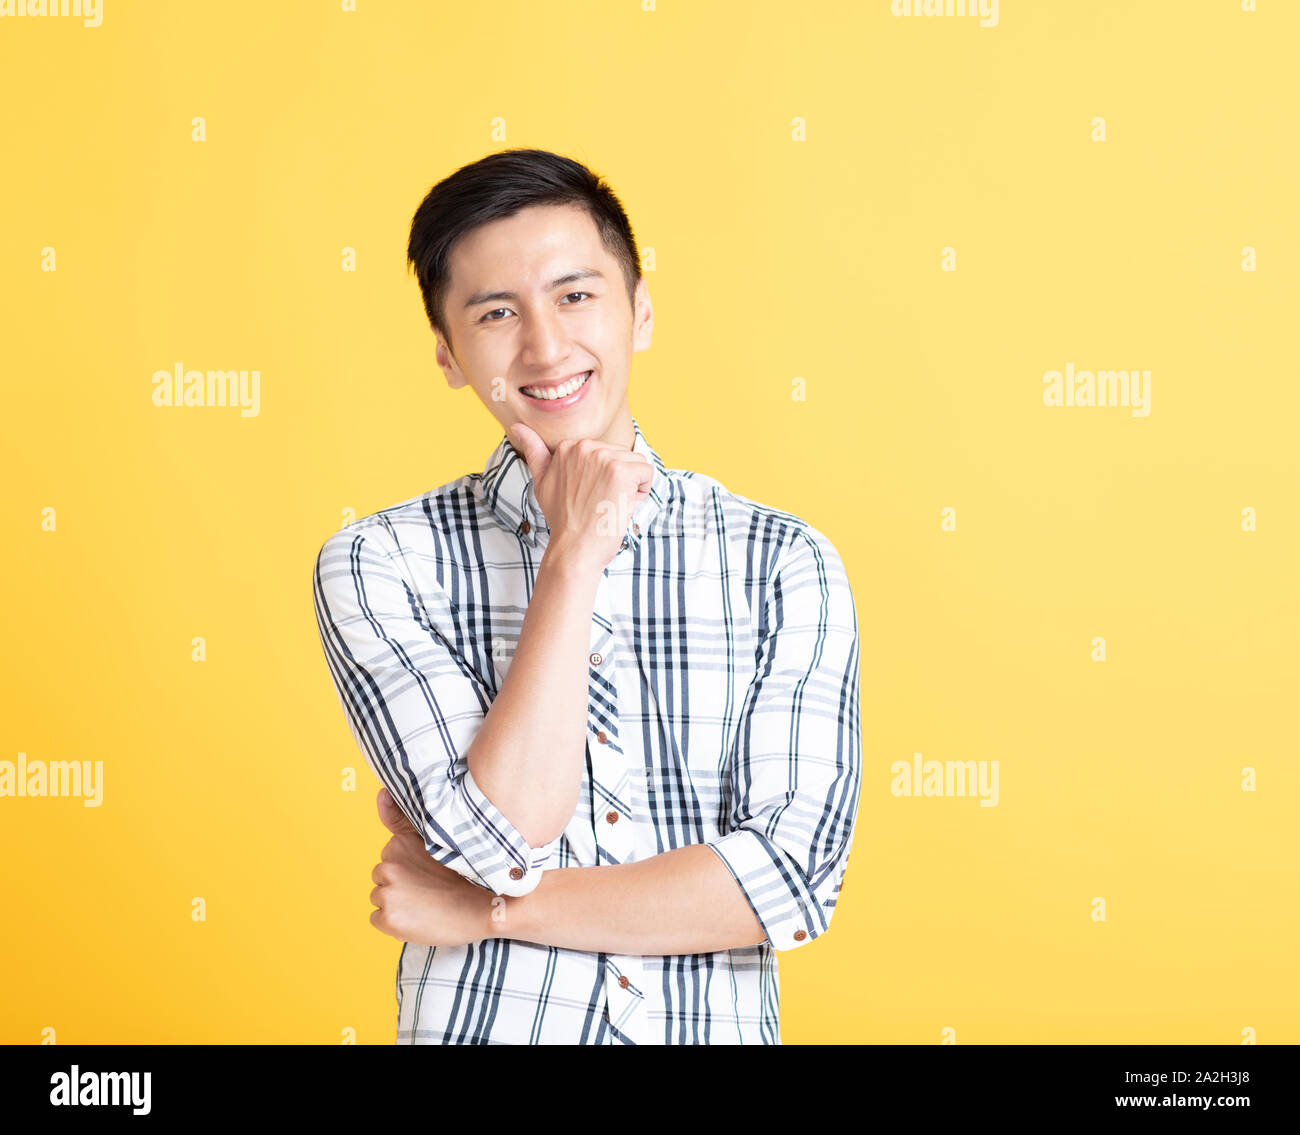 close up handsome young man smiling Stock Photo